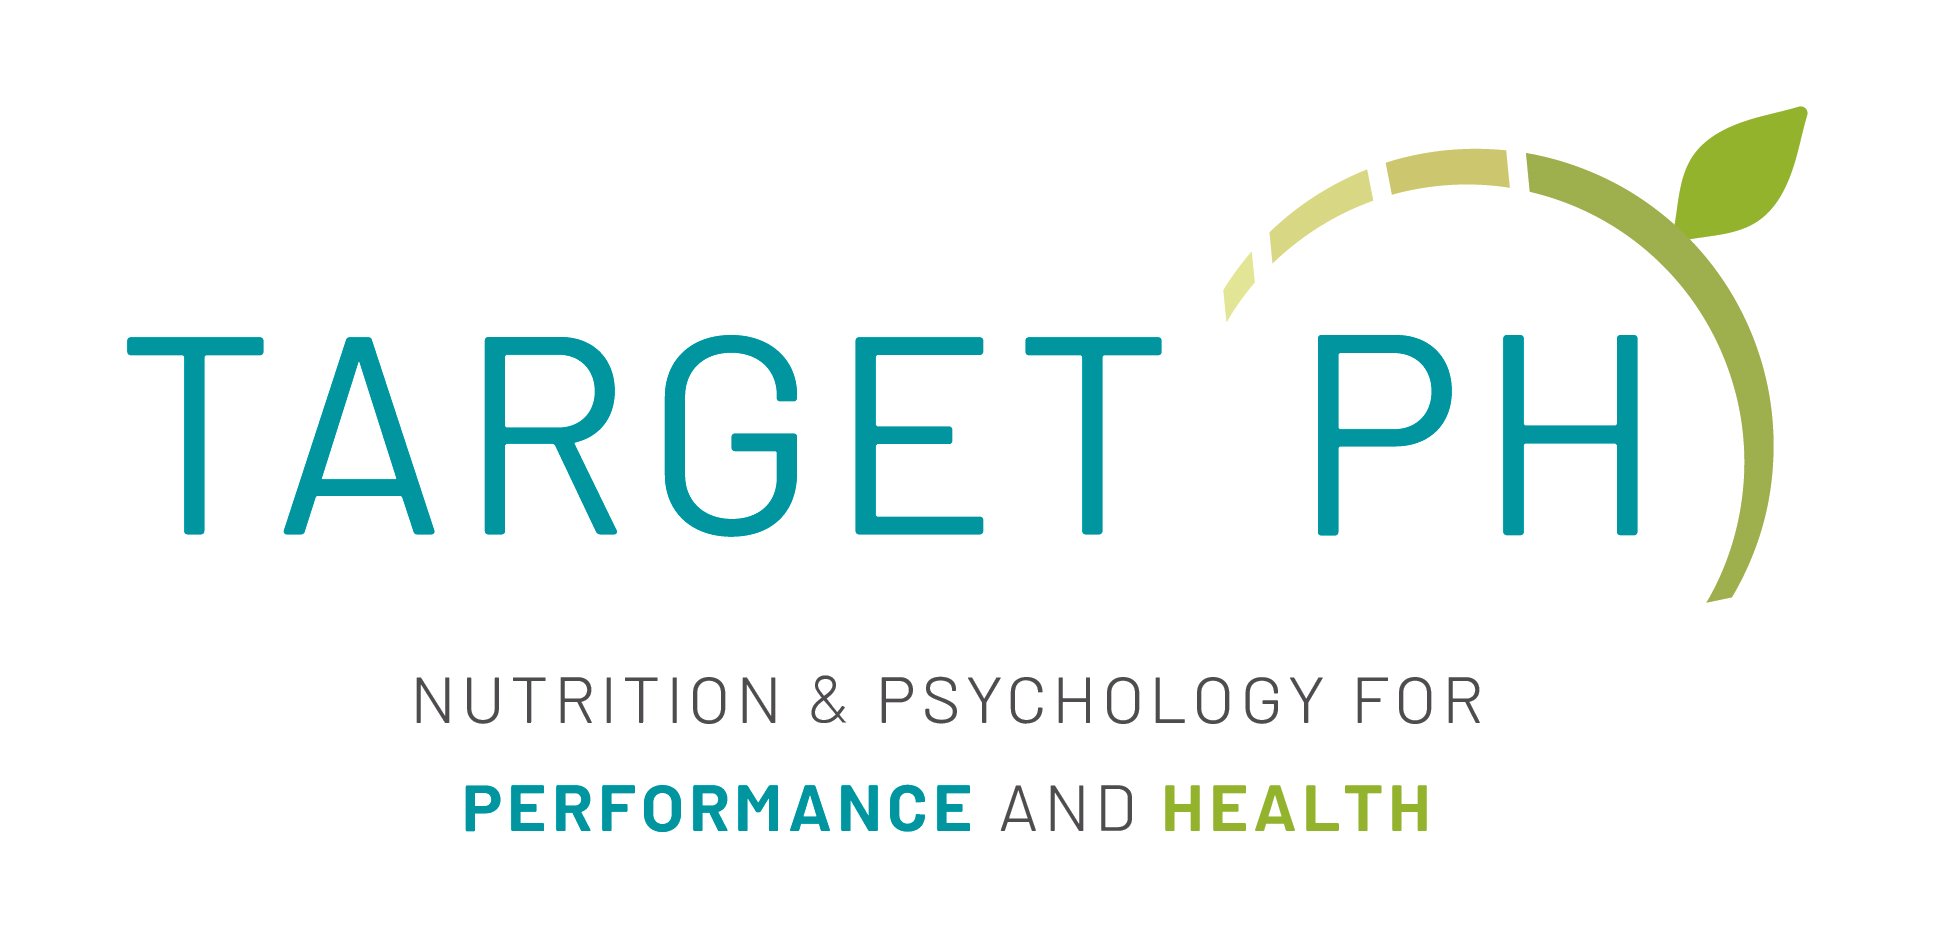 Target Performance and Health